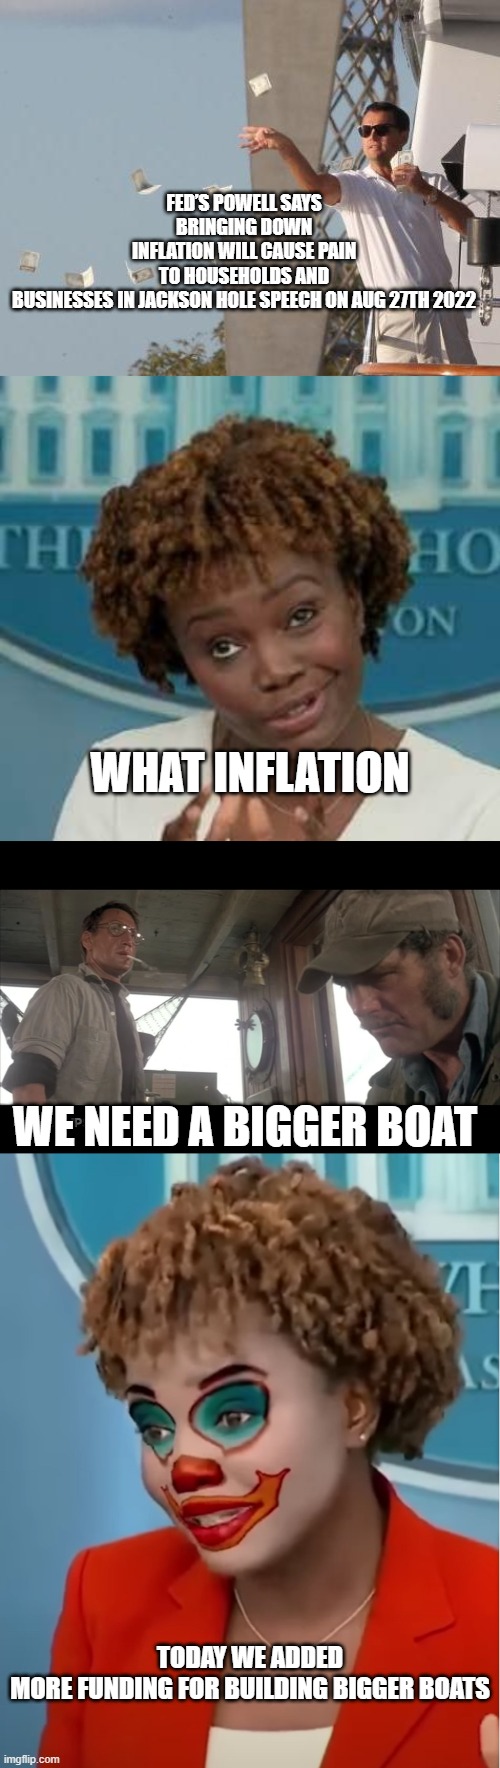 we need a bigger boat |  FED’S POWELL SAYS BRINGING DOWN INFLATION WILL CAUSE PAIN TO HOUSEHOLDS AND BUSINESSES IN JACKSON HOLE SPEECH ON AUG 27TH 2022; WHAT INFLATION; WE NEED A BIGGER BOAT; TODAY WE ADDED MORE FUNDING FOR BUILDING BIGGER BOATS | image tagged in leonardo dicaprio throwing money,white house press secretary,were gonna need a bigger boat,clown karine | made w/ Imgflip meme maker